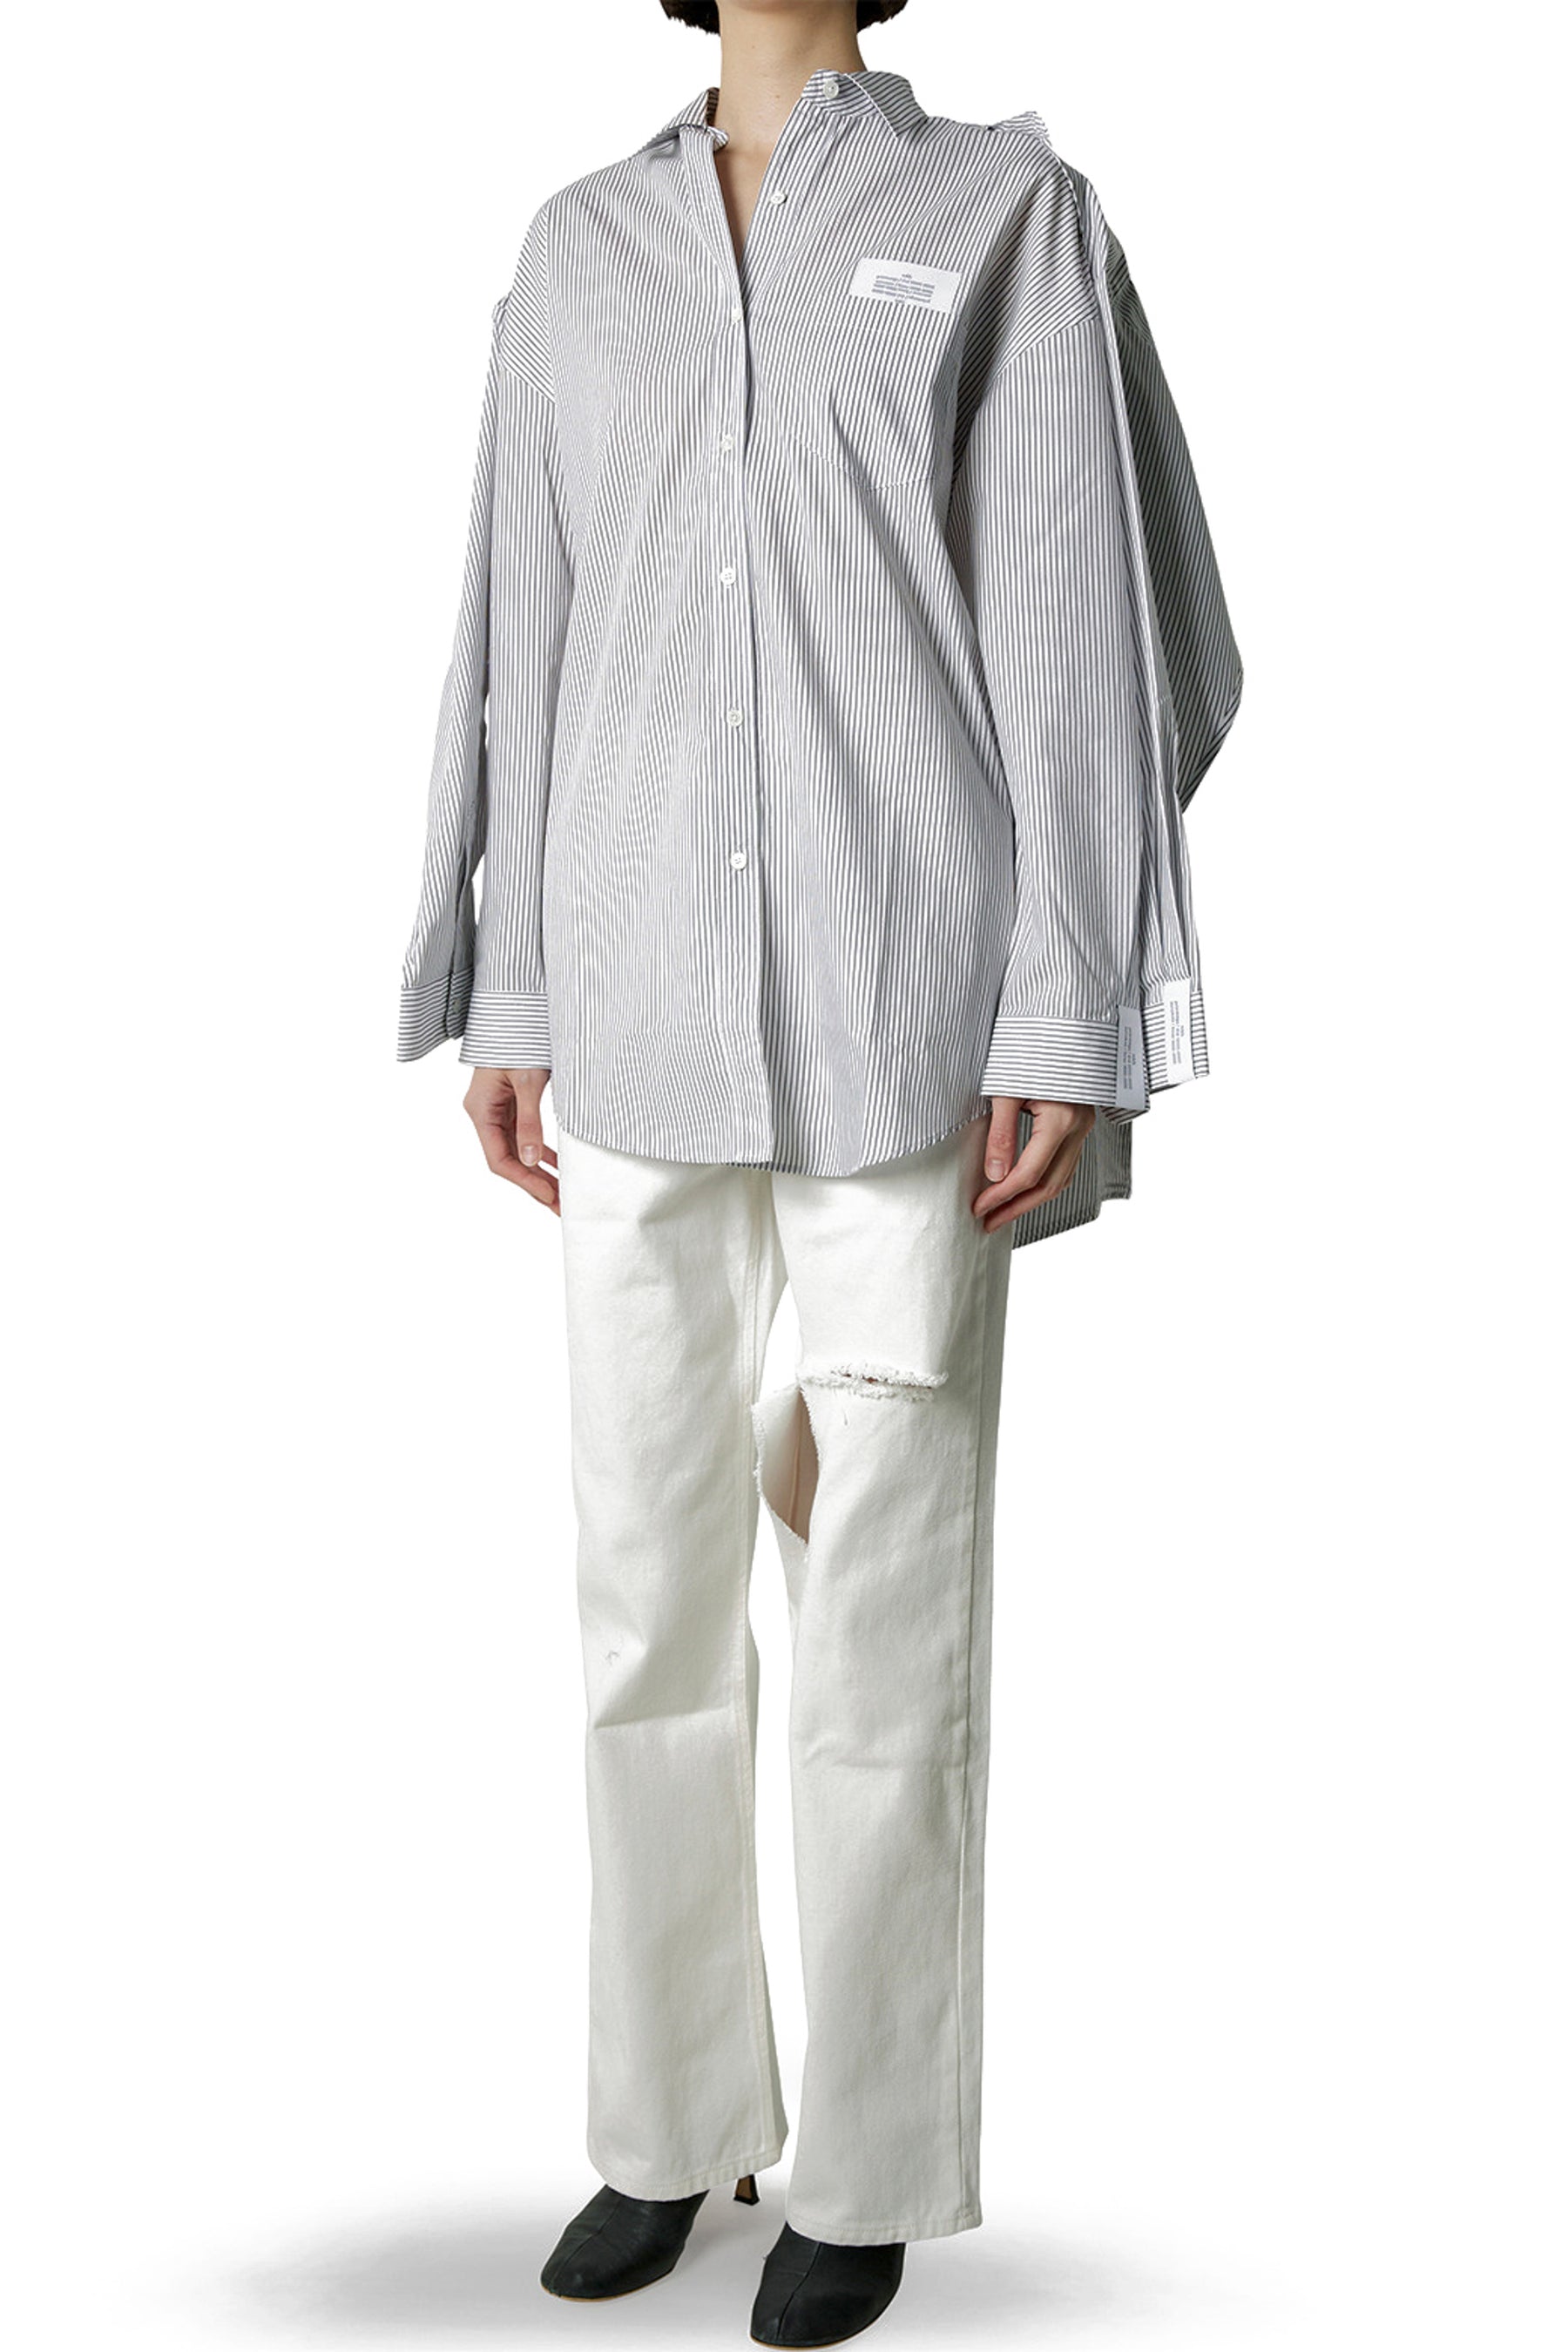 DOUBLE LAYERED SHIRTS - WHITE WITH GREY STRIPE / WHT